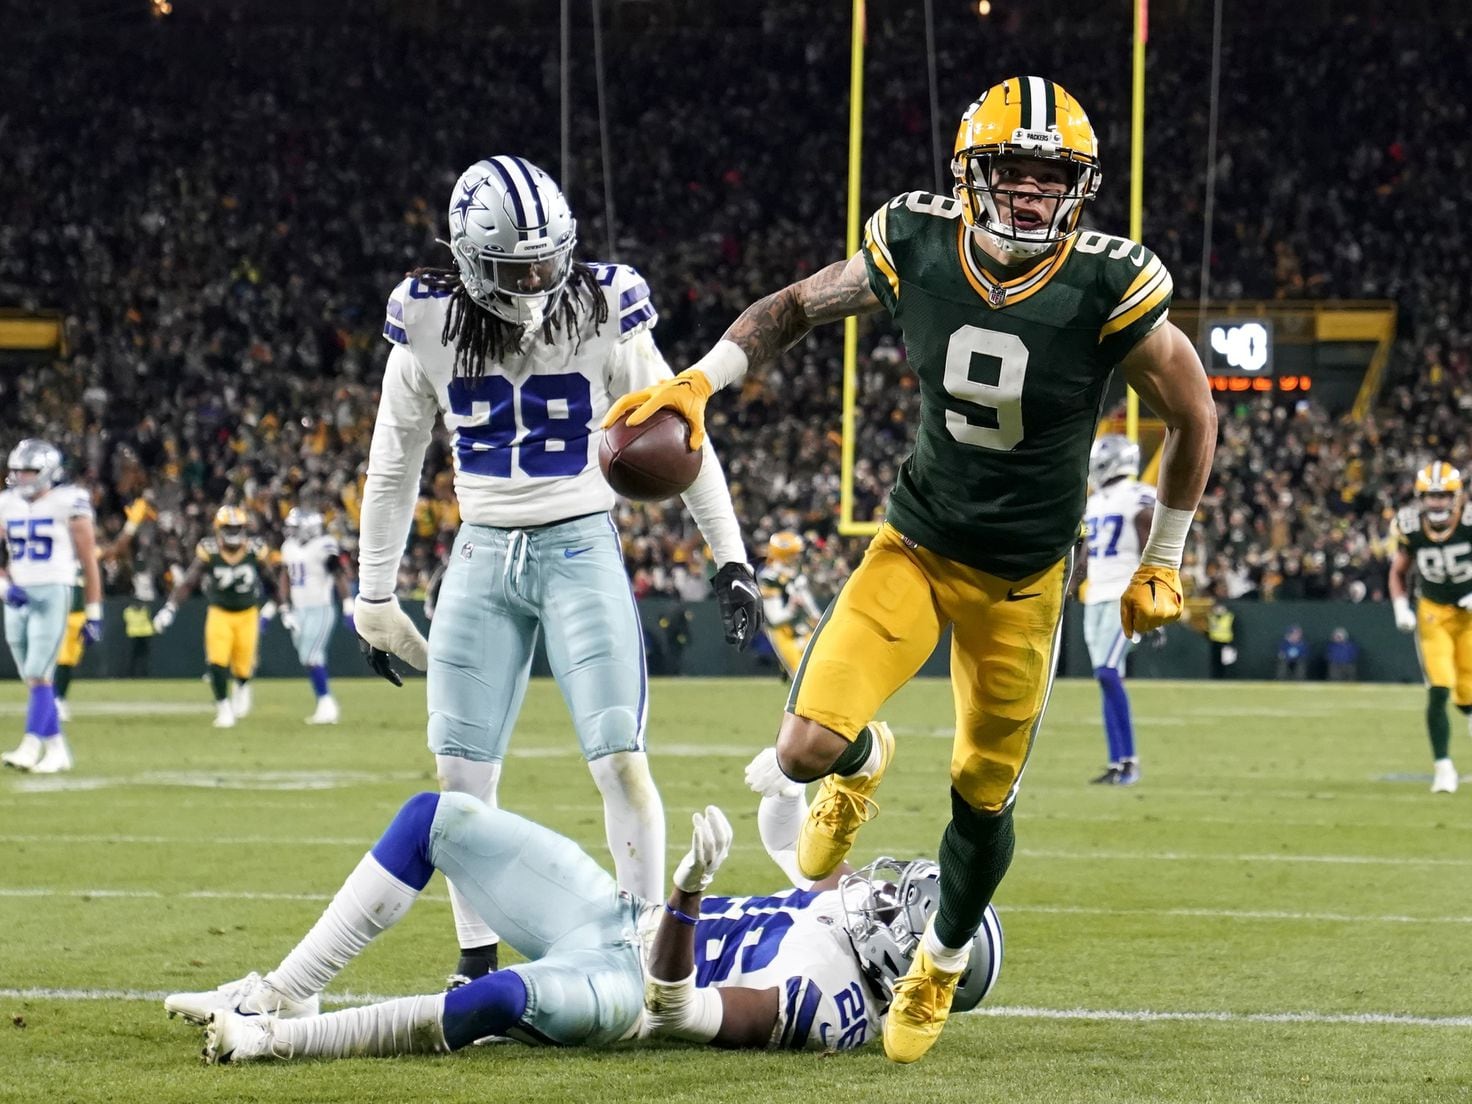 Dallas Cowboys 28-Green Bay Packers 31, Packers win in overtime